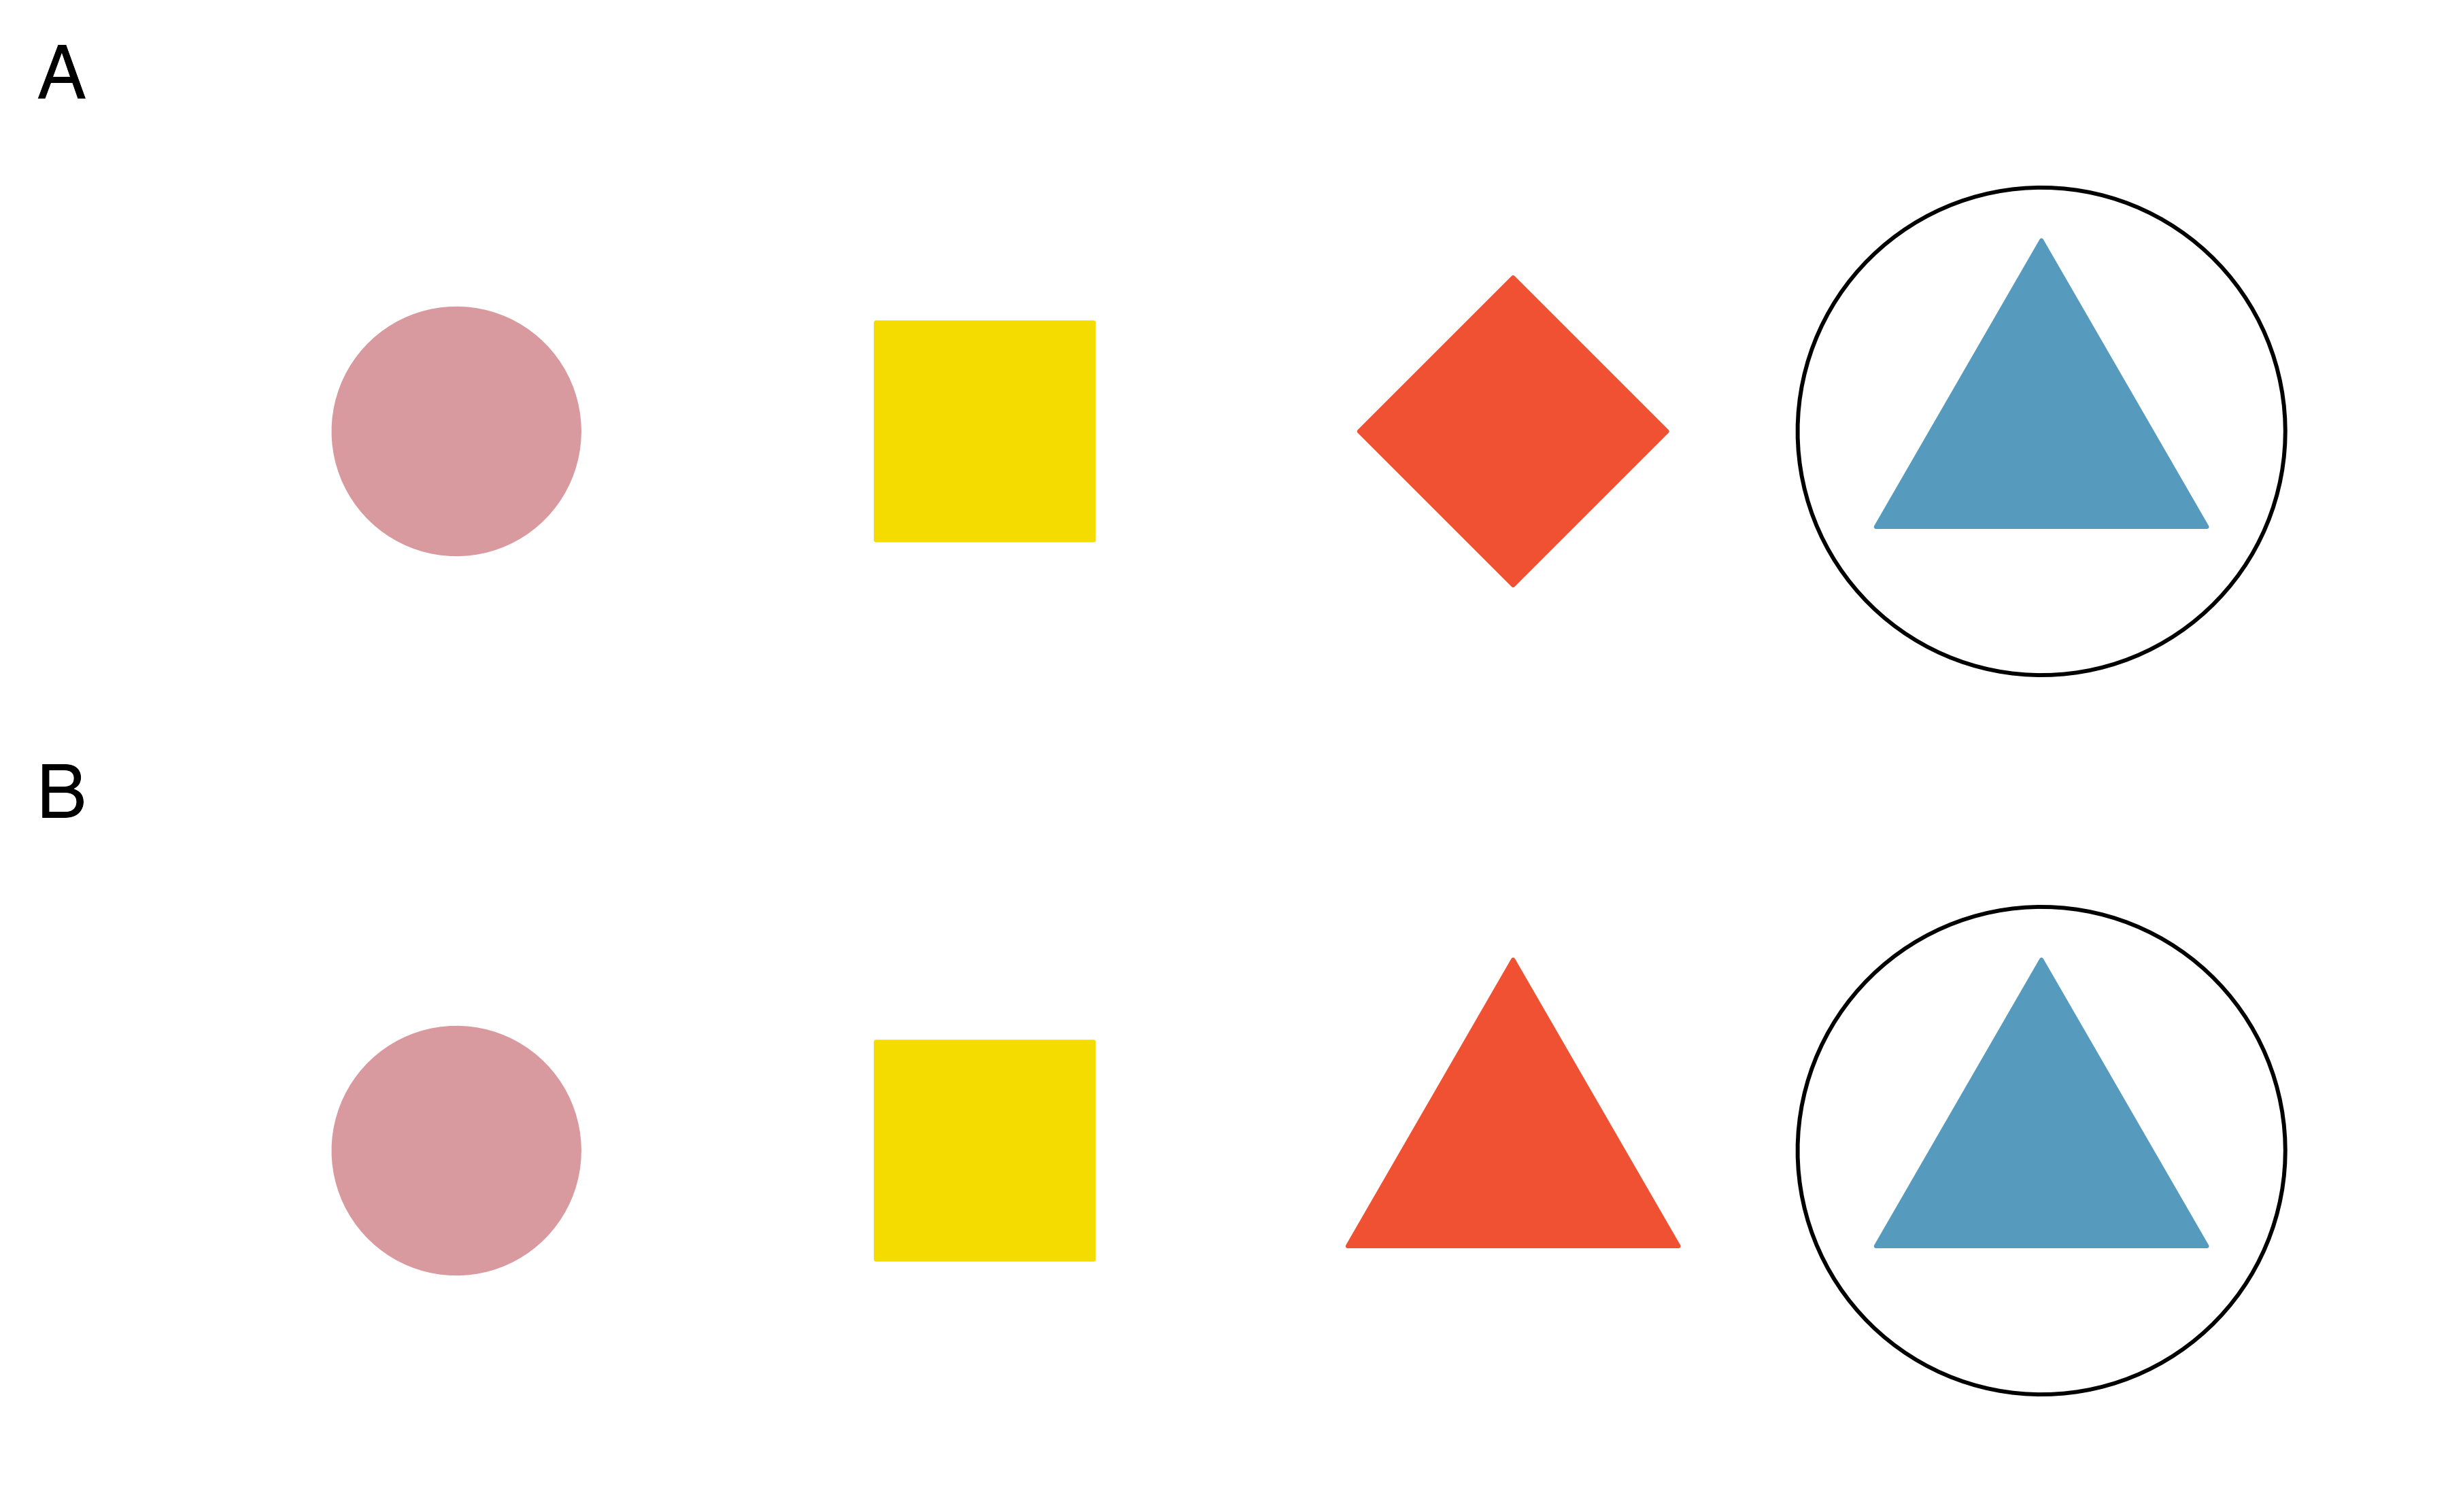 "Four shapes are presented twice. In A (the top presentation) the shapes and colors are all different: pink circle, yellow square, red diamond, blue triangle. In B (the bottom presentation) the colors are all different but the traingle shape is repeated: pink circle, yellow square, red triangle, blue triangle. In each of the two presentations the blue triangle is circled."